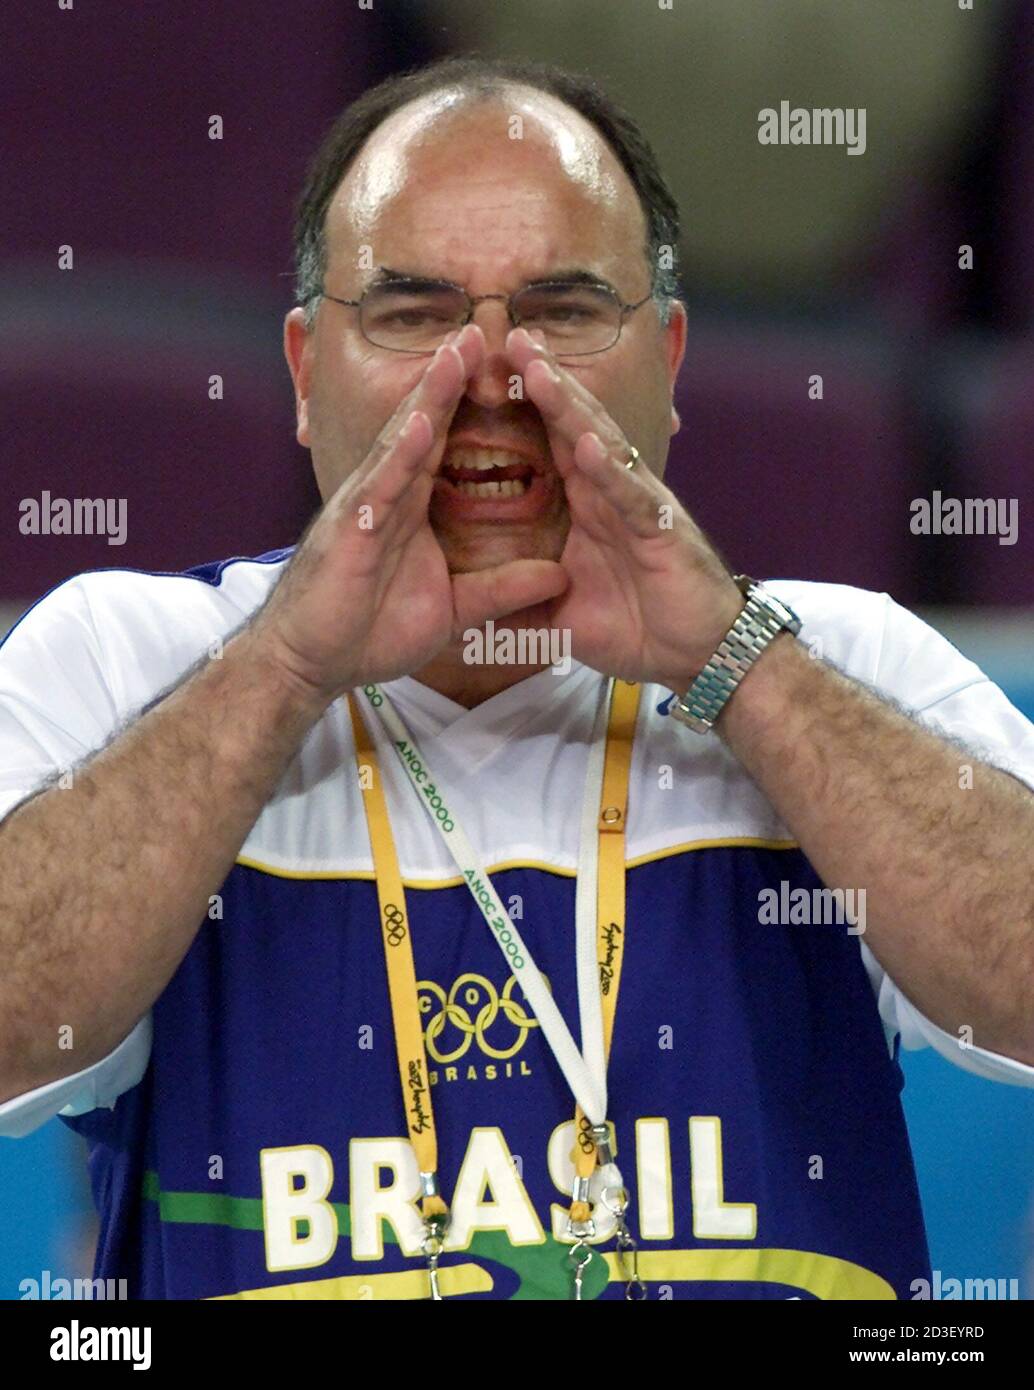 Brazilian coach Radames Lattari screams with players at the quarter final match against Argentina during the volley competition at the Sydney 2000 Olympic Games, September 27, 2000. Argentina beat Brazil 17-25 25-21 25-19 27-25 and advance to the semifinals.  PW Stock Photo